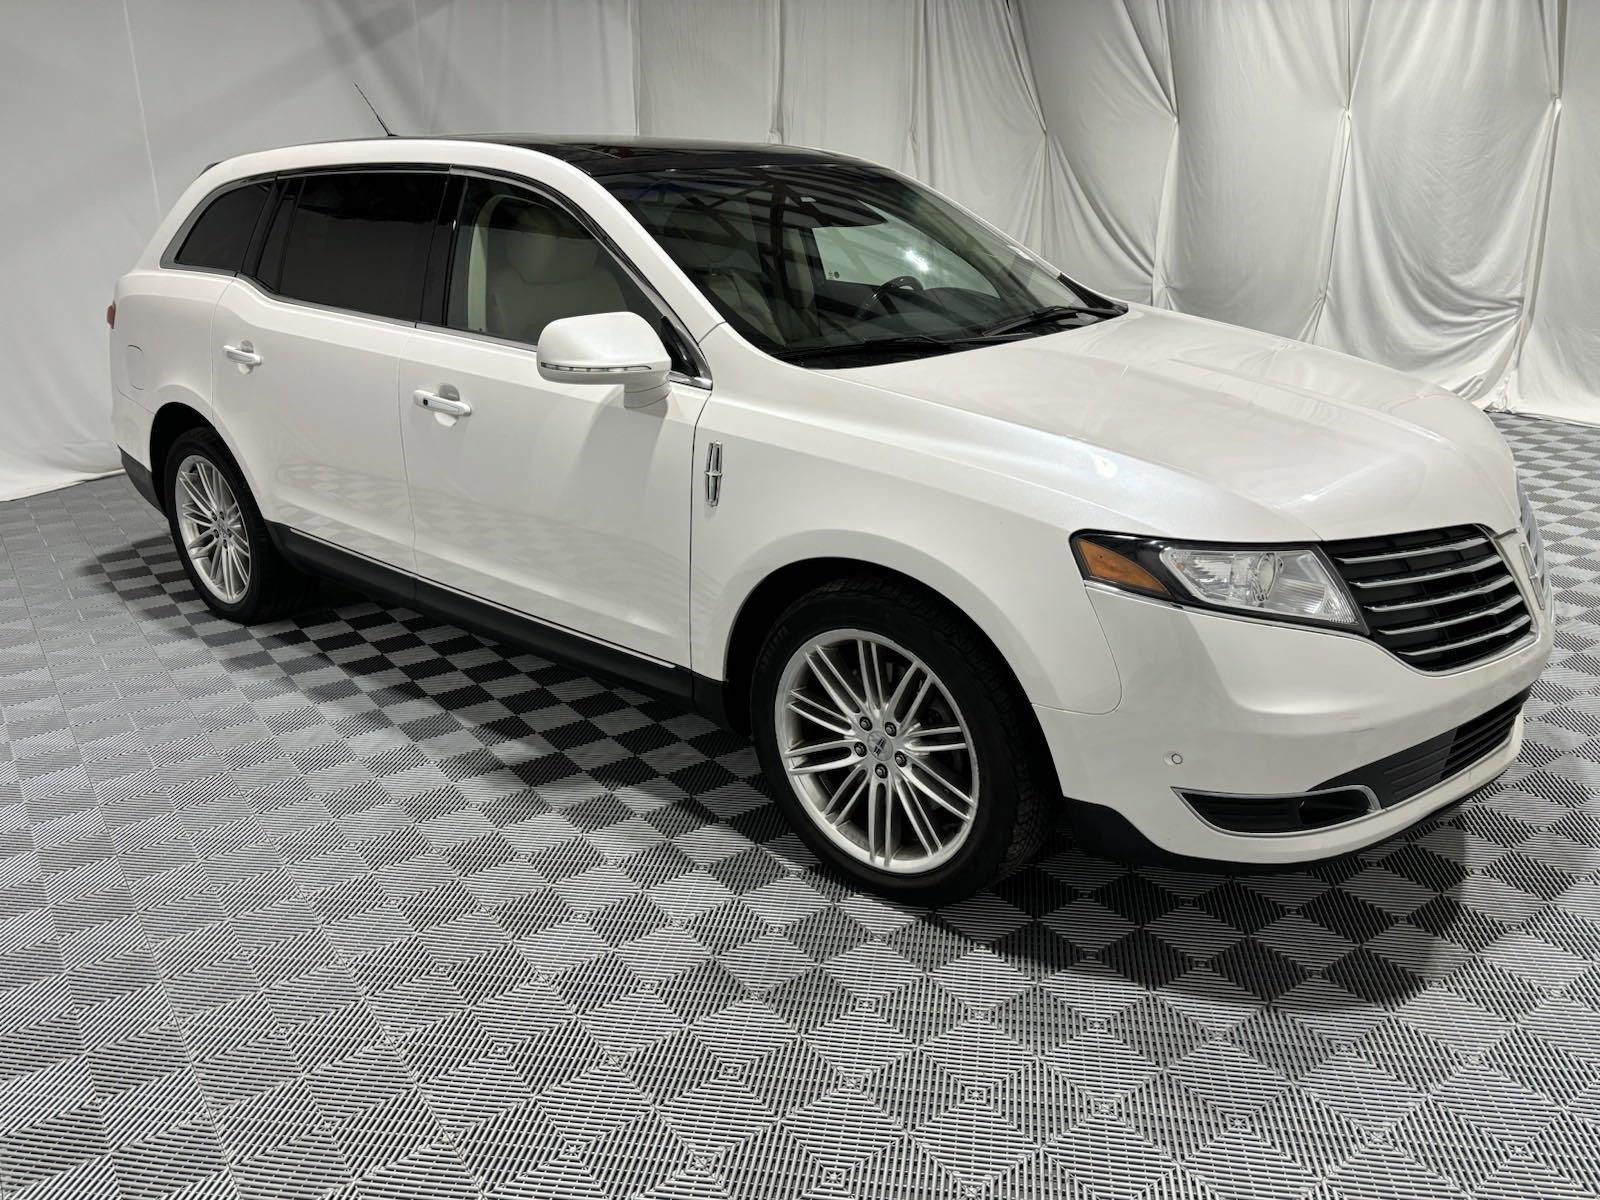 Used 2019 Lincoln MKT Standard SUV for sale in St Joseph MO